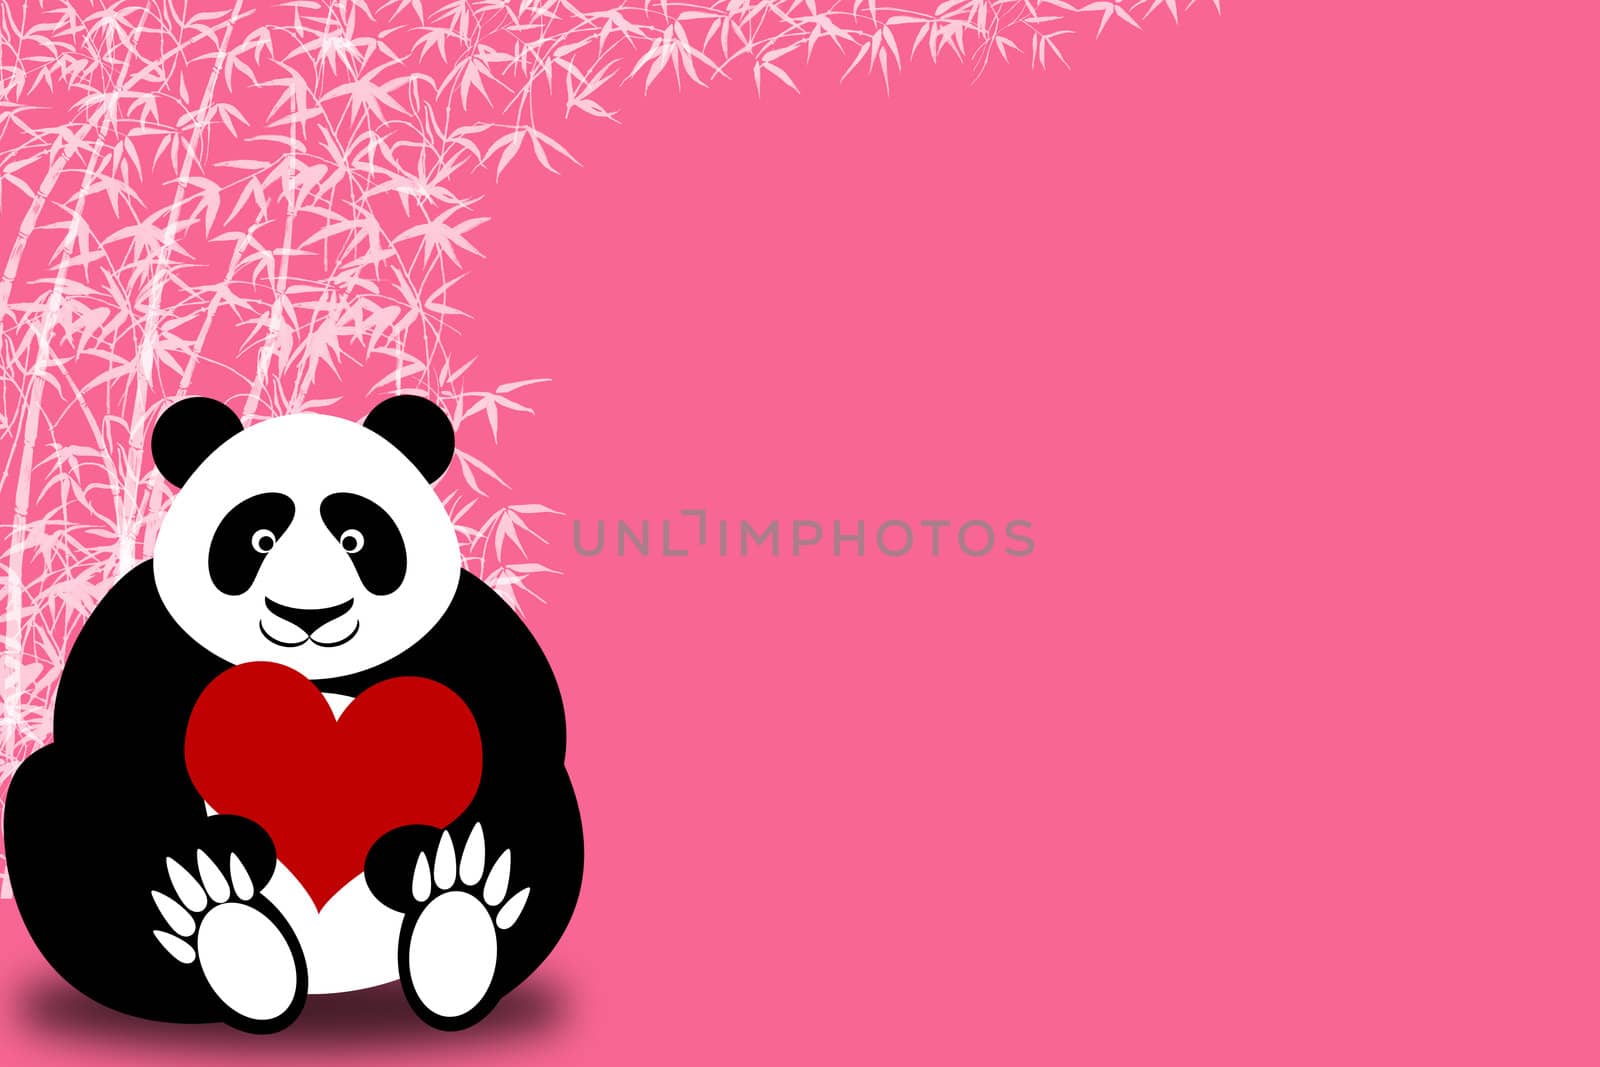 Happy Valentines Day Panda Bear Holding Heart by Davidgn